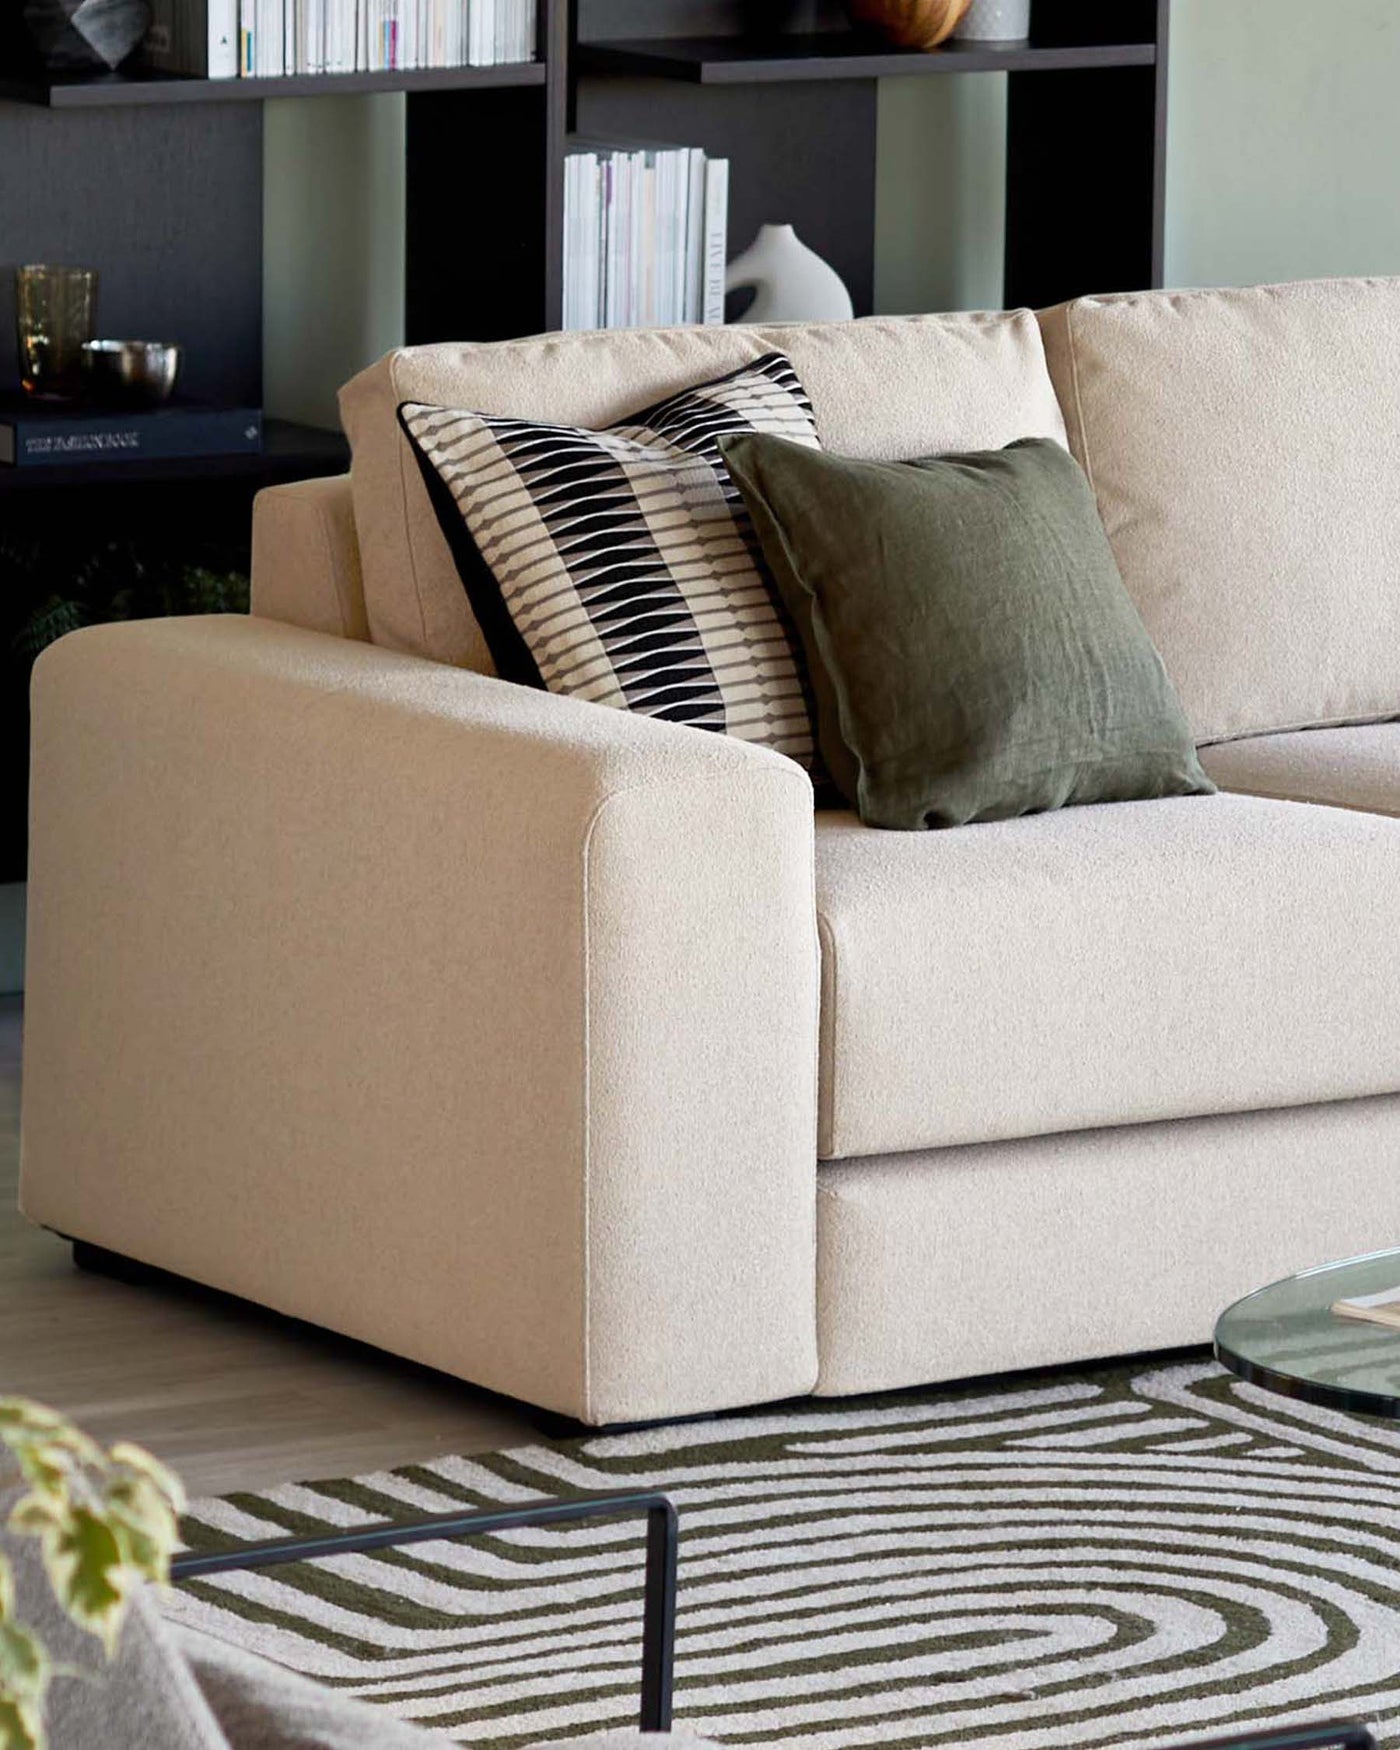 Eriksen 3 Seater Sofa in Ivory Soft Touch Boucle